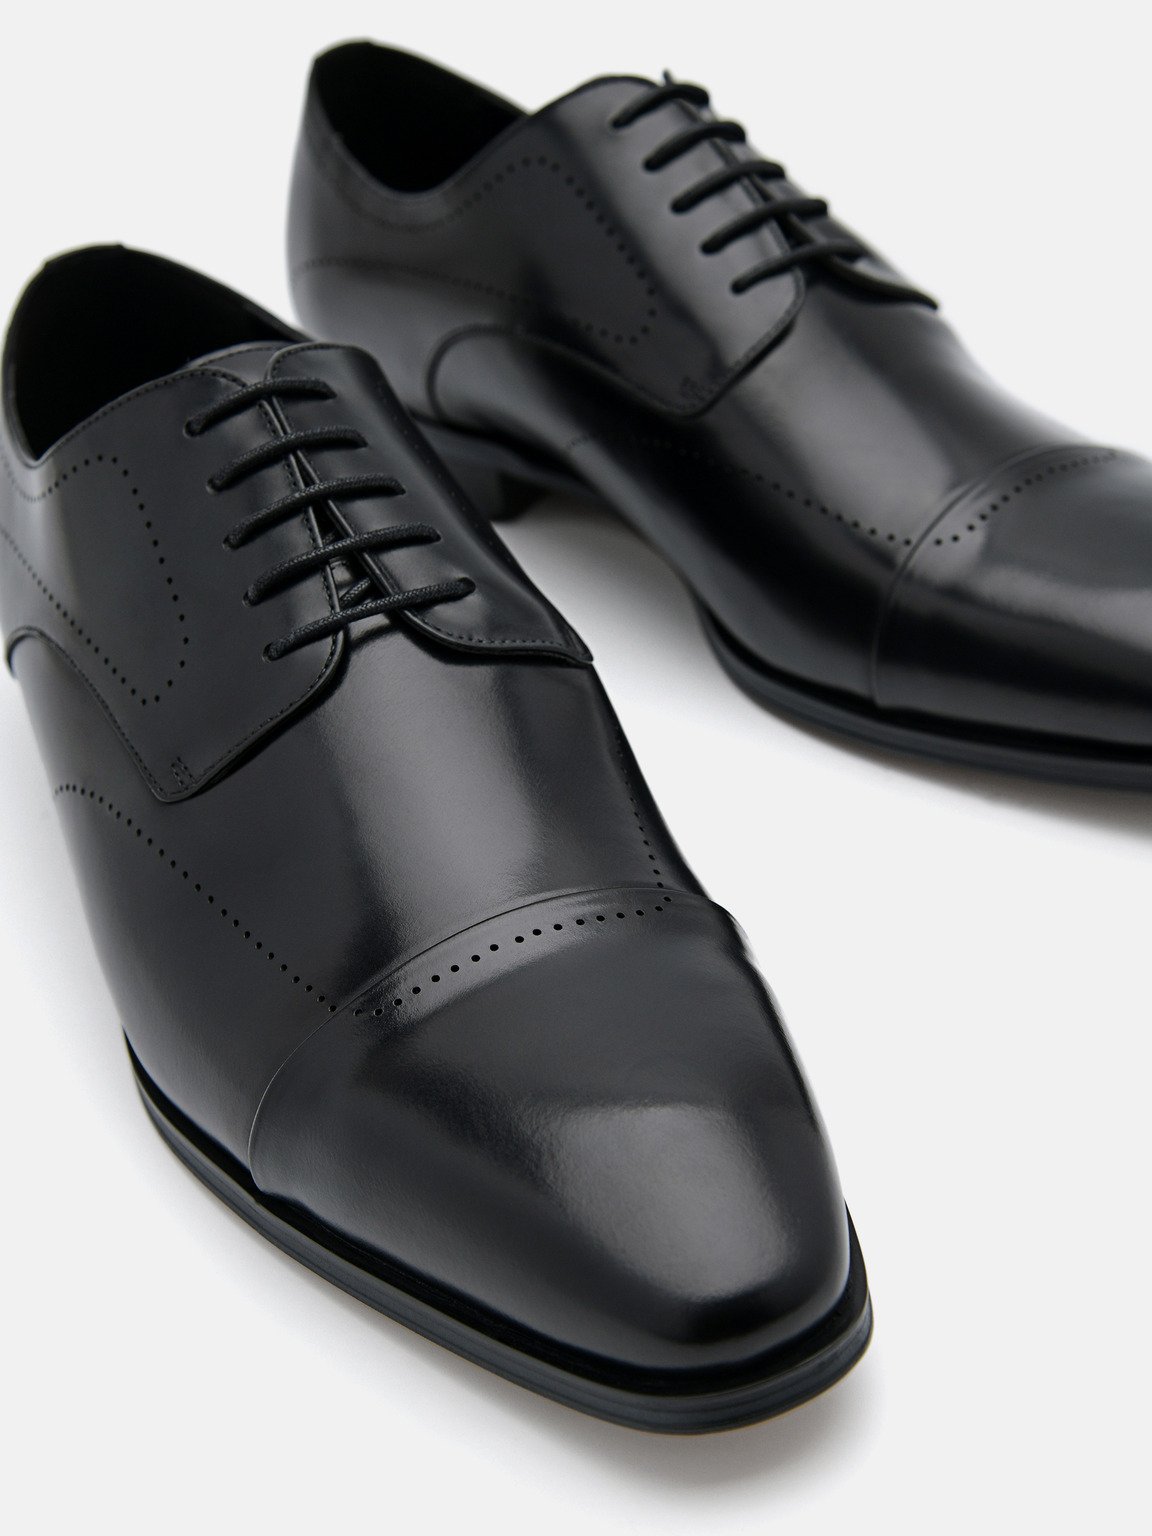 Leather Brogue Derby Shoes, Black